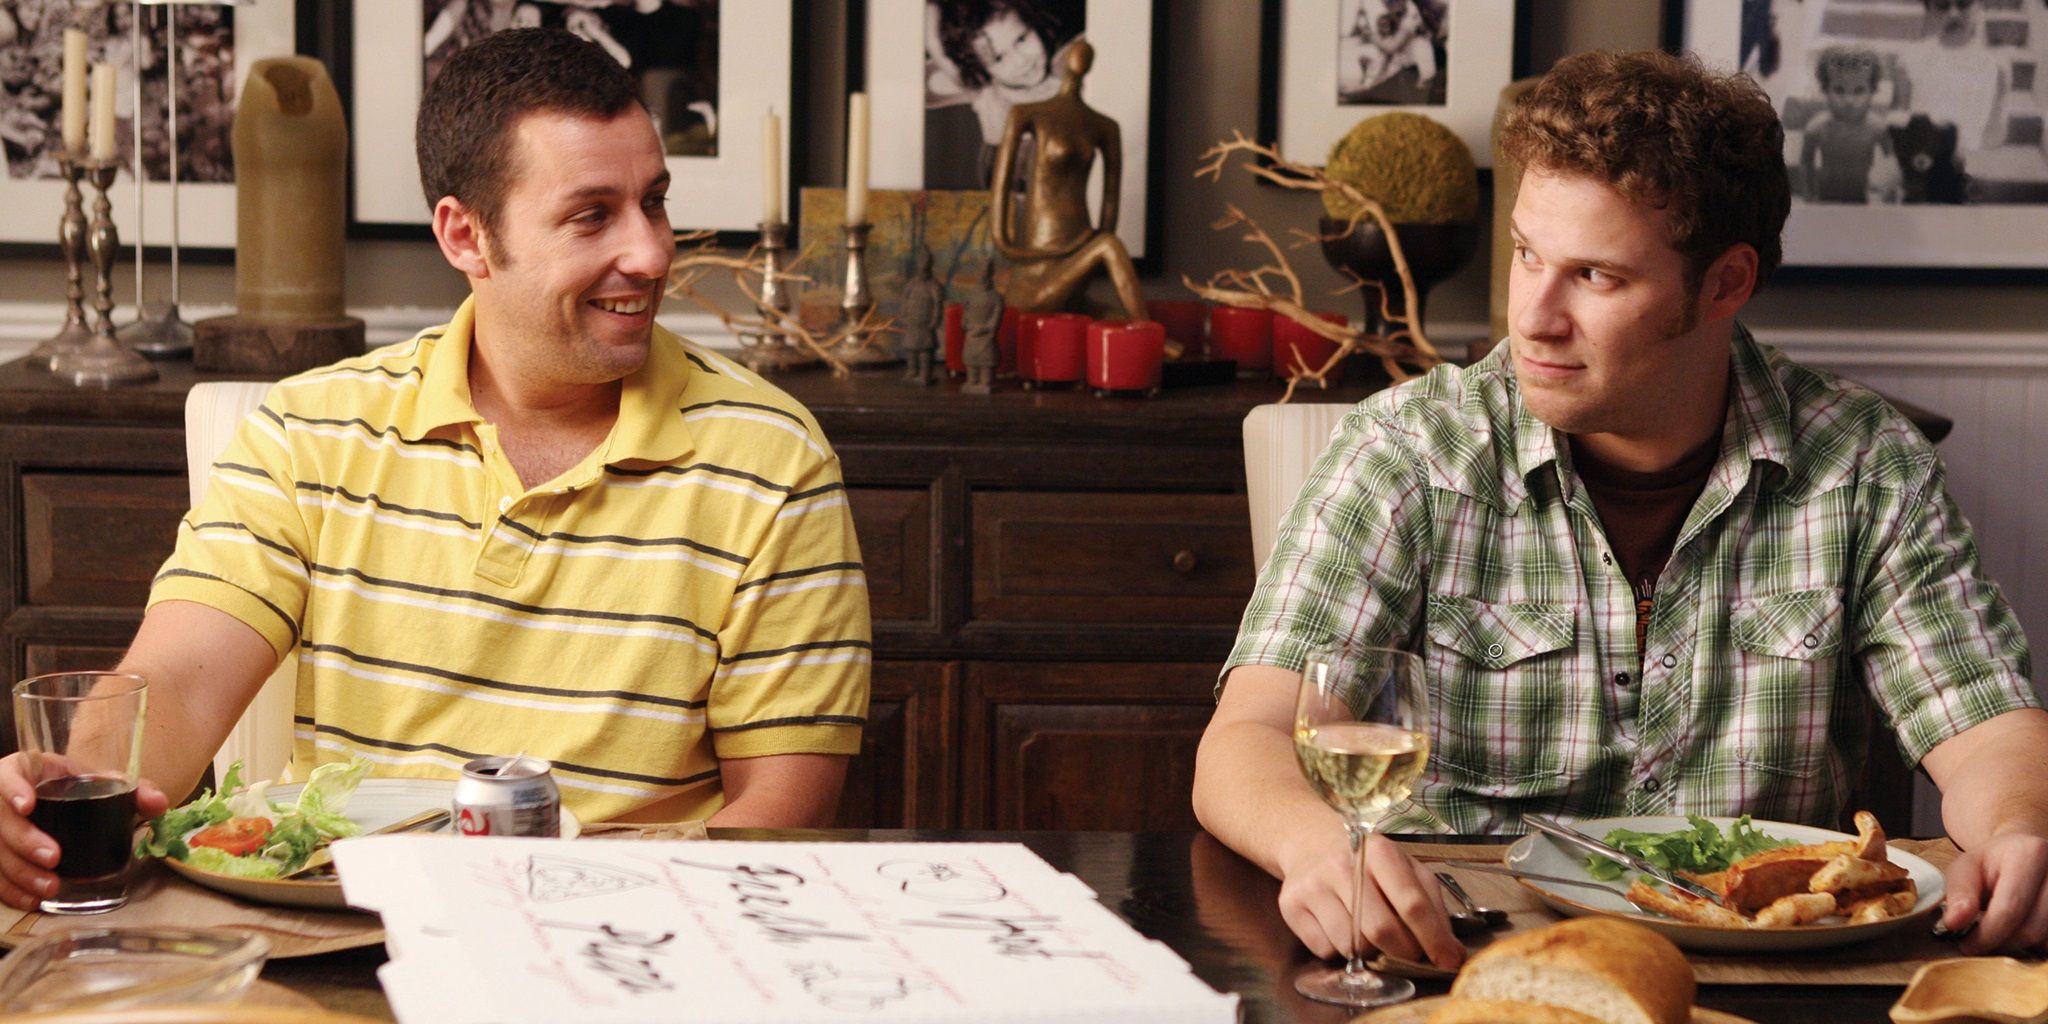 Seth Rogen and Adam Sandler at an awkward dinner party in Funny People